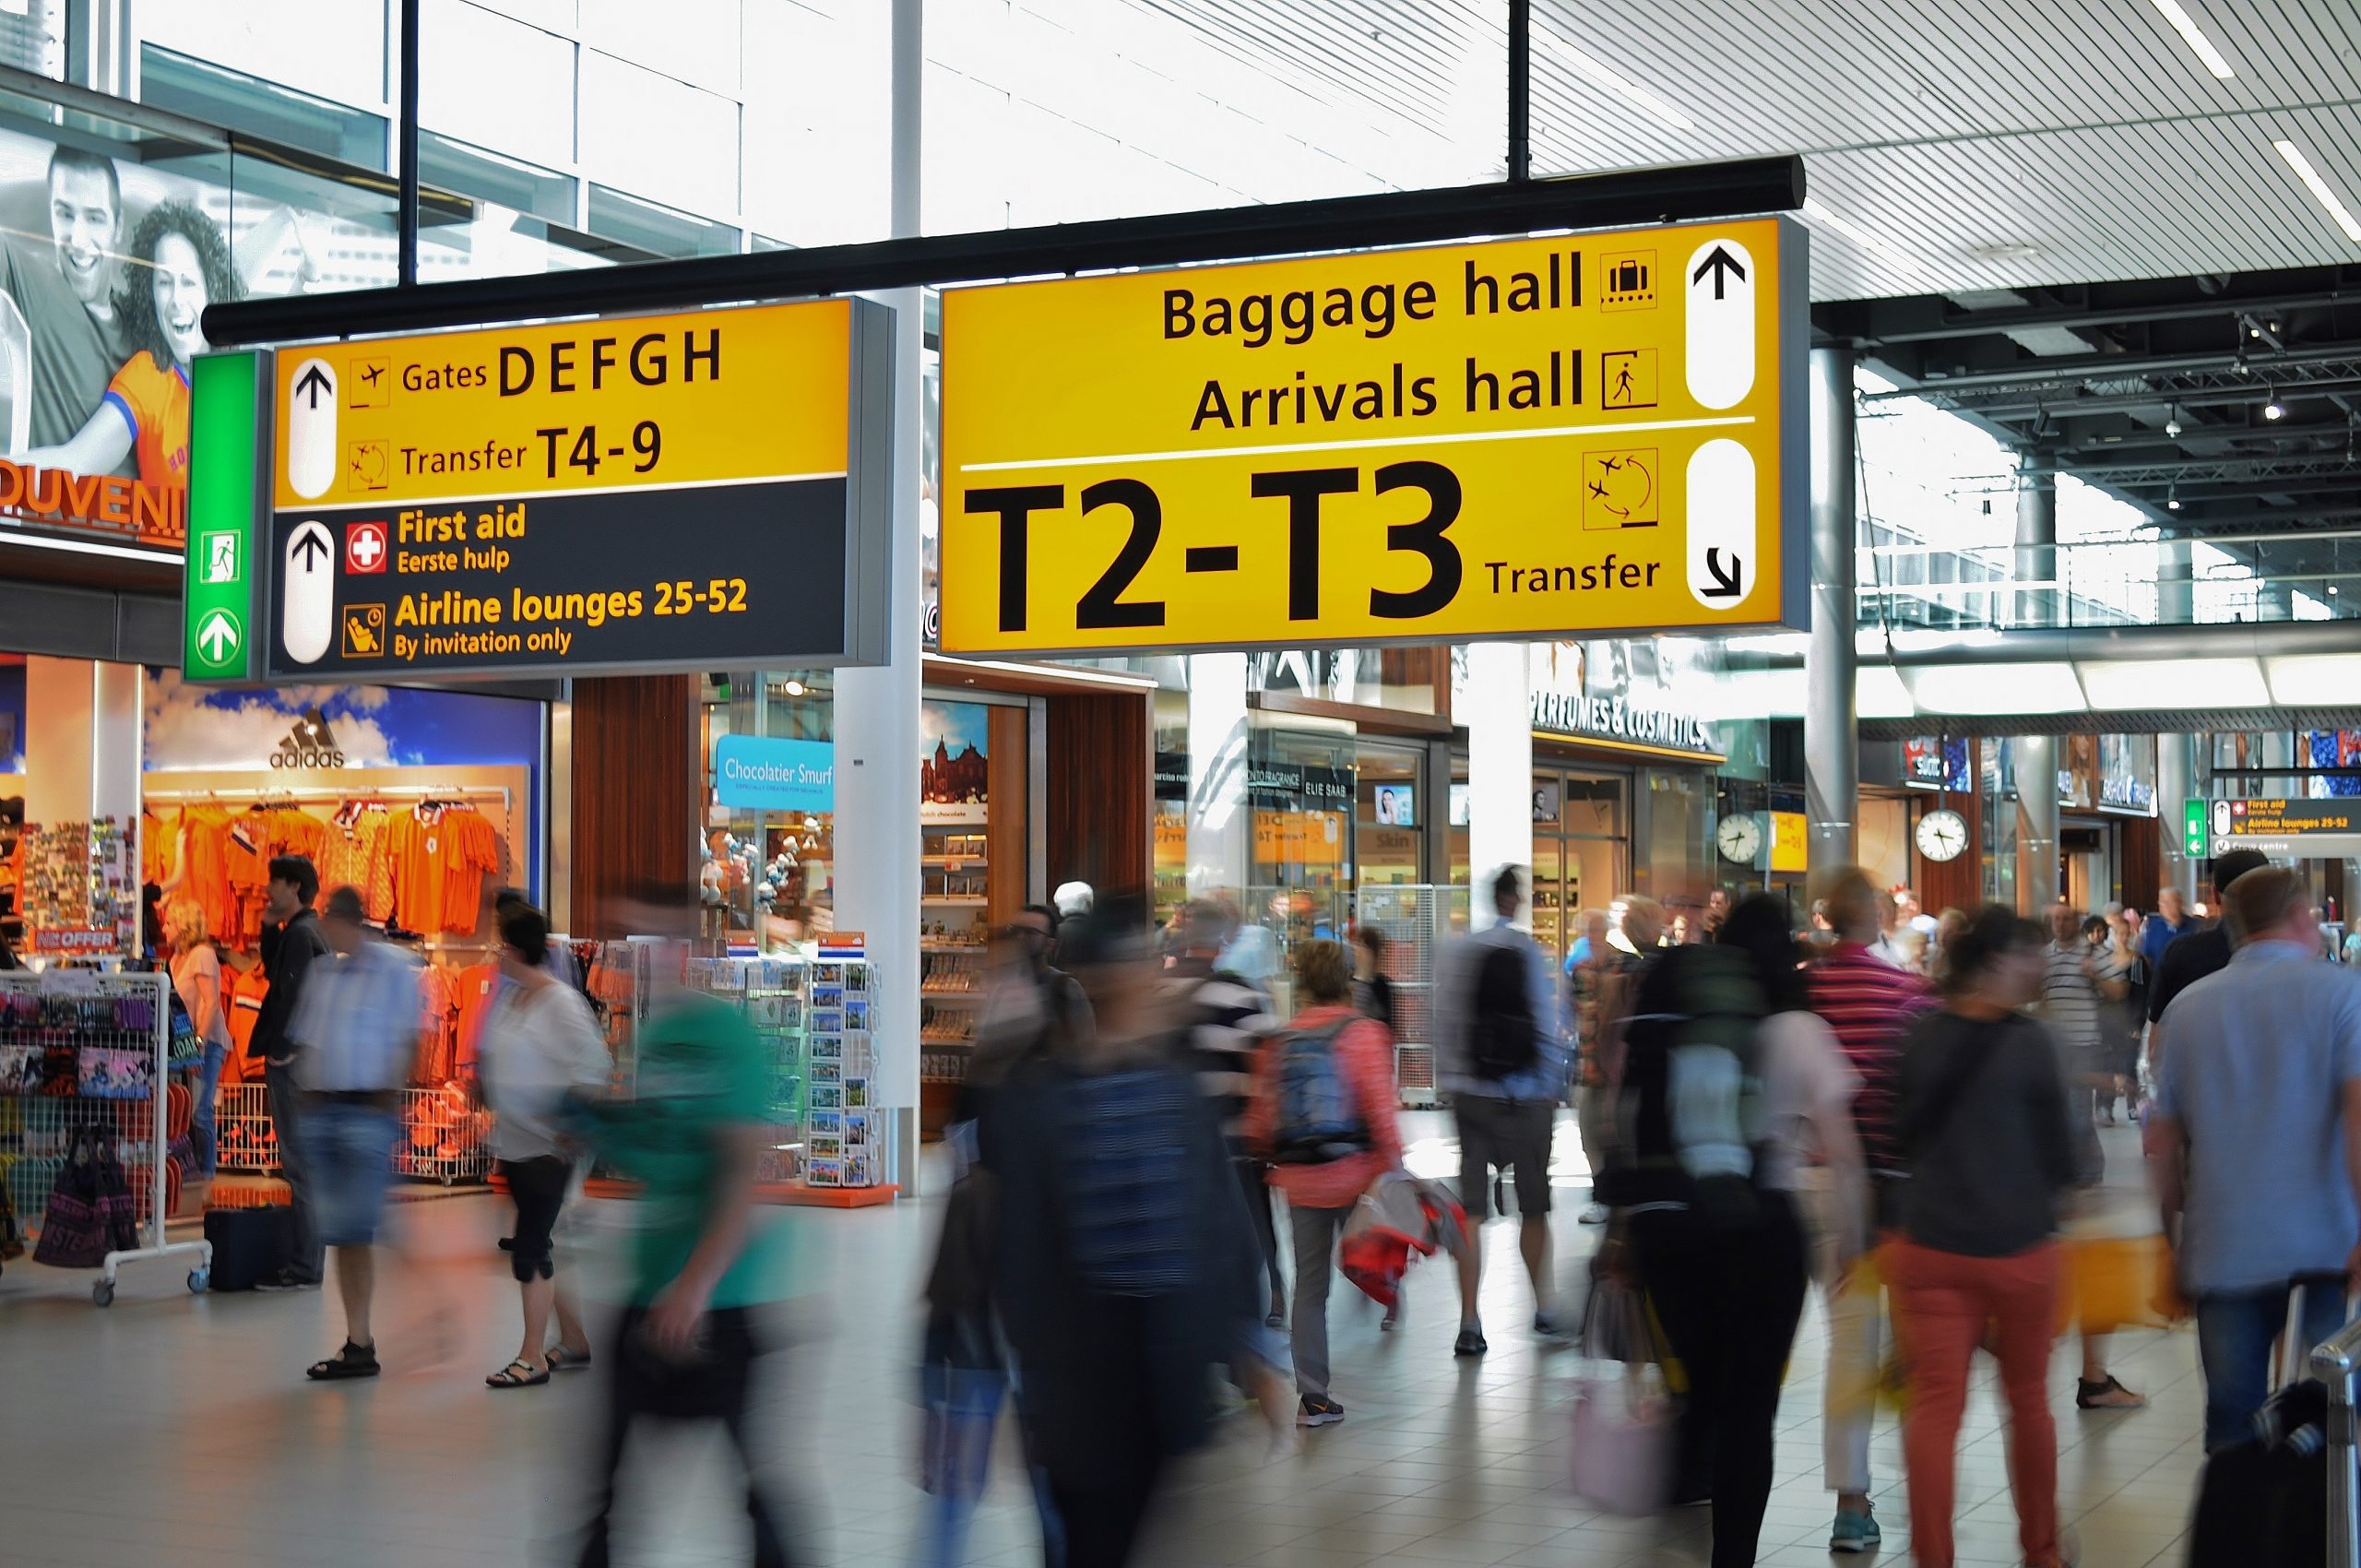 5 Tips on Getting through the Airport Quickly and Easily